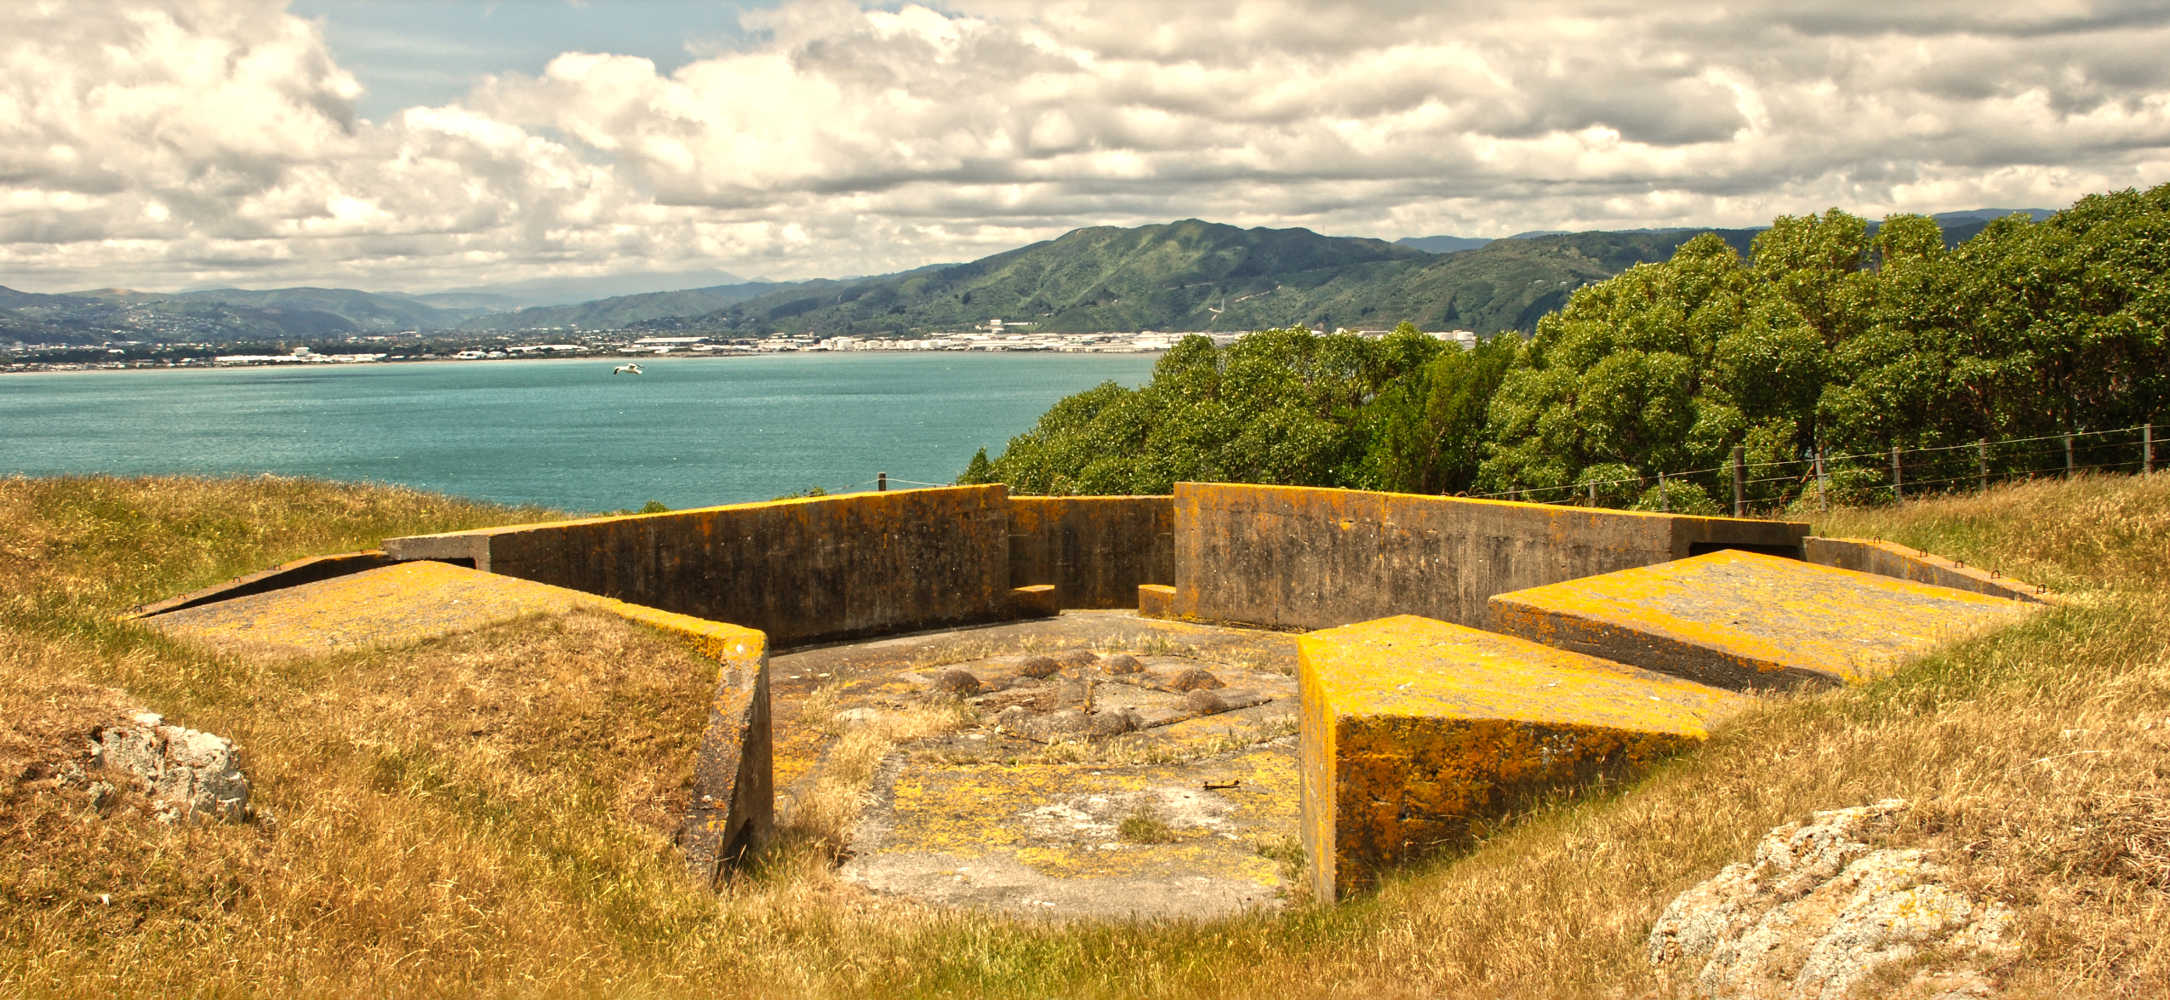 Anti-aircraft gun emplacements on Matiu / Somes Island, over looking Wellington harbour on a beautiful day, Wellington, New Zealand